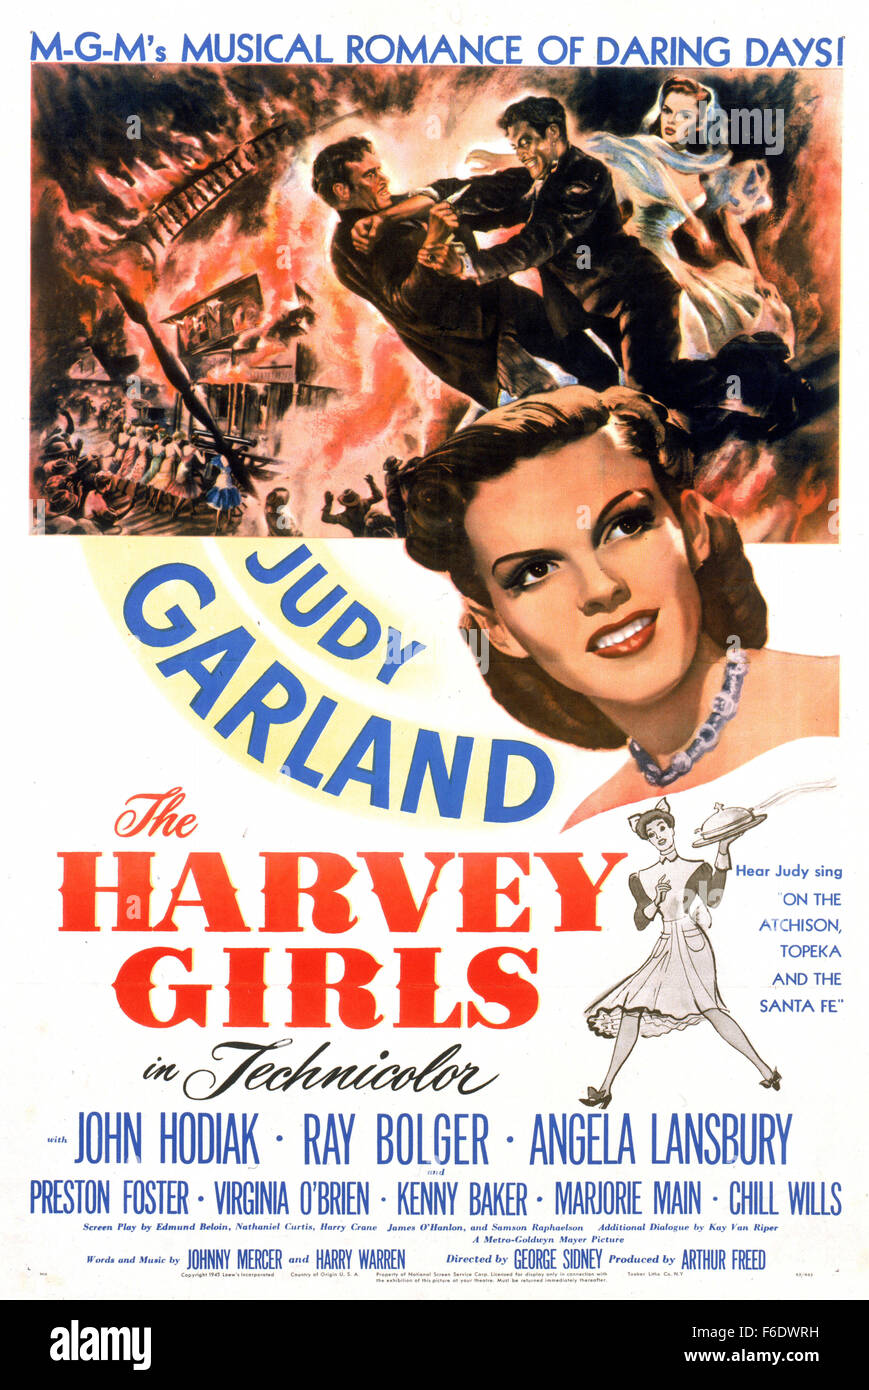 RELEASE DATE: January 18, 1946. MOVIE TITLE: The Harvey Girls. STUDIO: Metro-Goldwyn-Mayer (MGM). PLOT: On a train trip West to become a mail order bride Susan Bradley meets a cheery crew of young women traveling out to open a Harvey House restaurant at a remote whistle stop to provide good cooking and wholesome company for railway travellers. When Susan and her bashful suitor find romance daunting, Susan joins the Harvey Girls instead. The saloon across the street with its alluring worldly-wise women offers them tough competition, fair and foul, and Susan catches the eye of the Ned Trent, Stock Photo